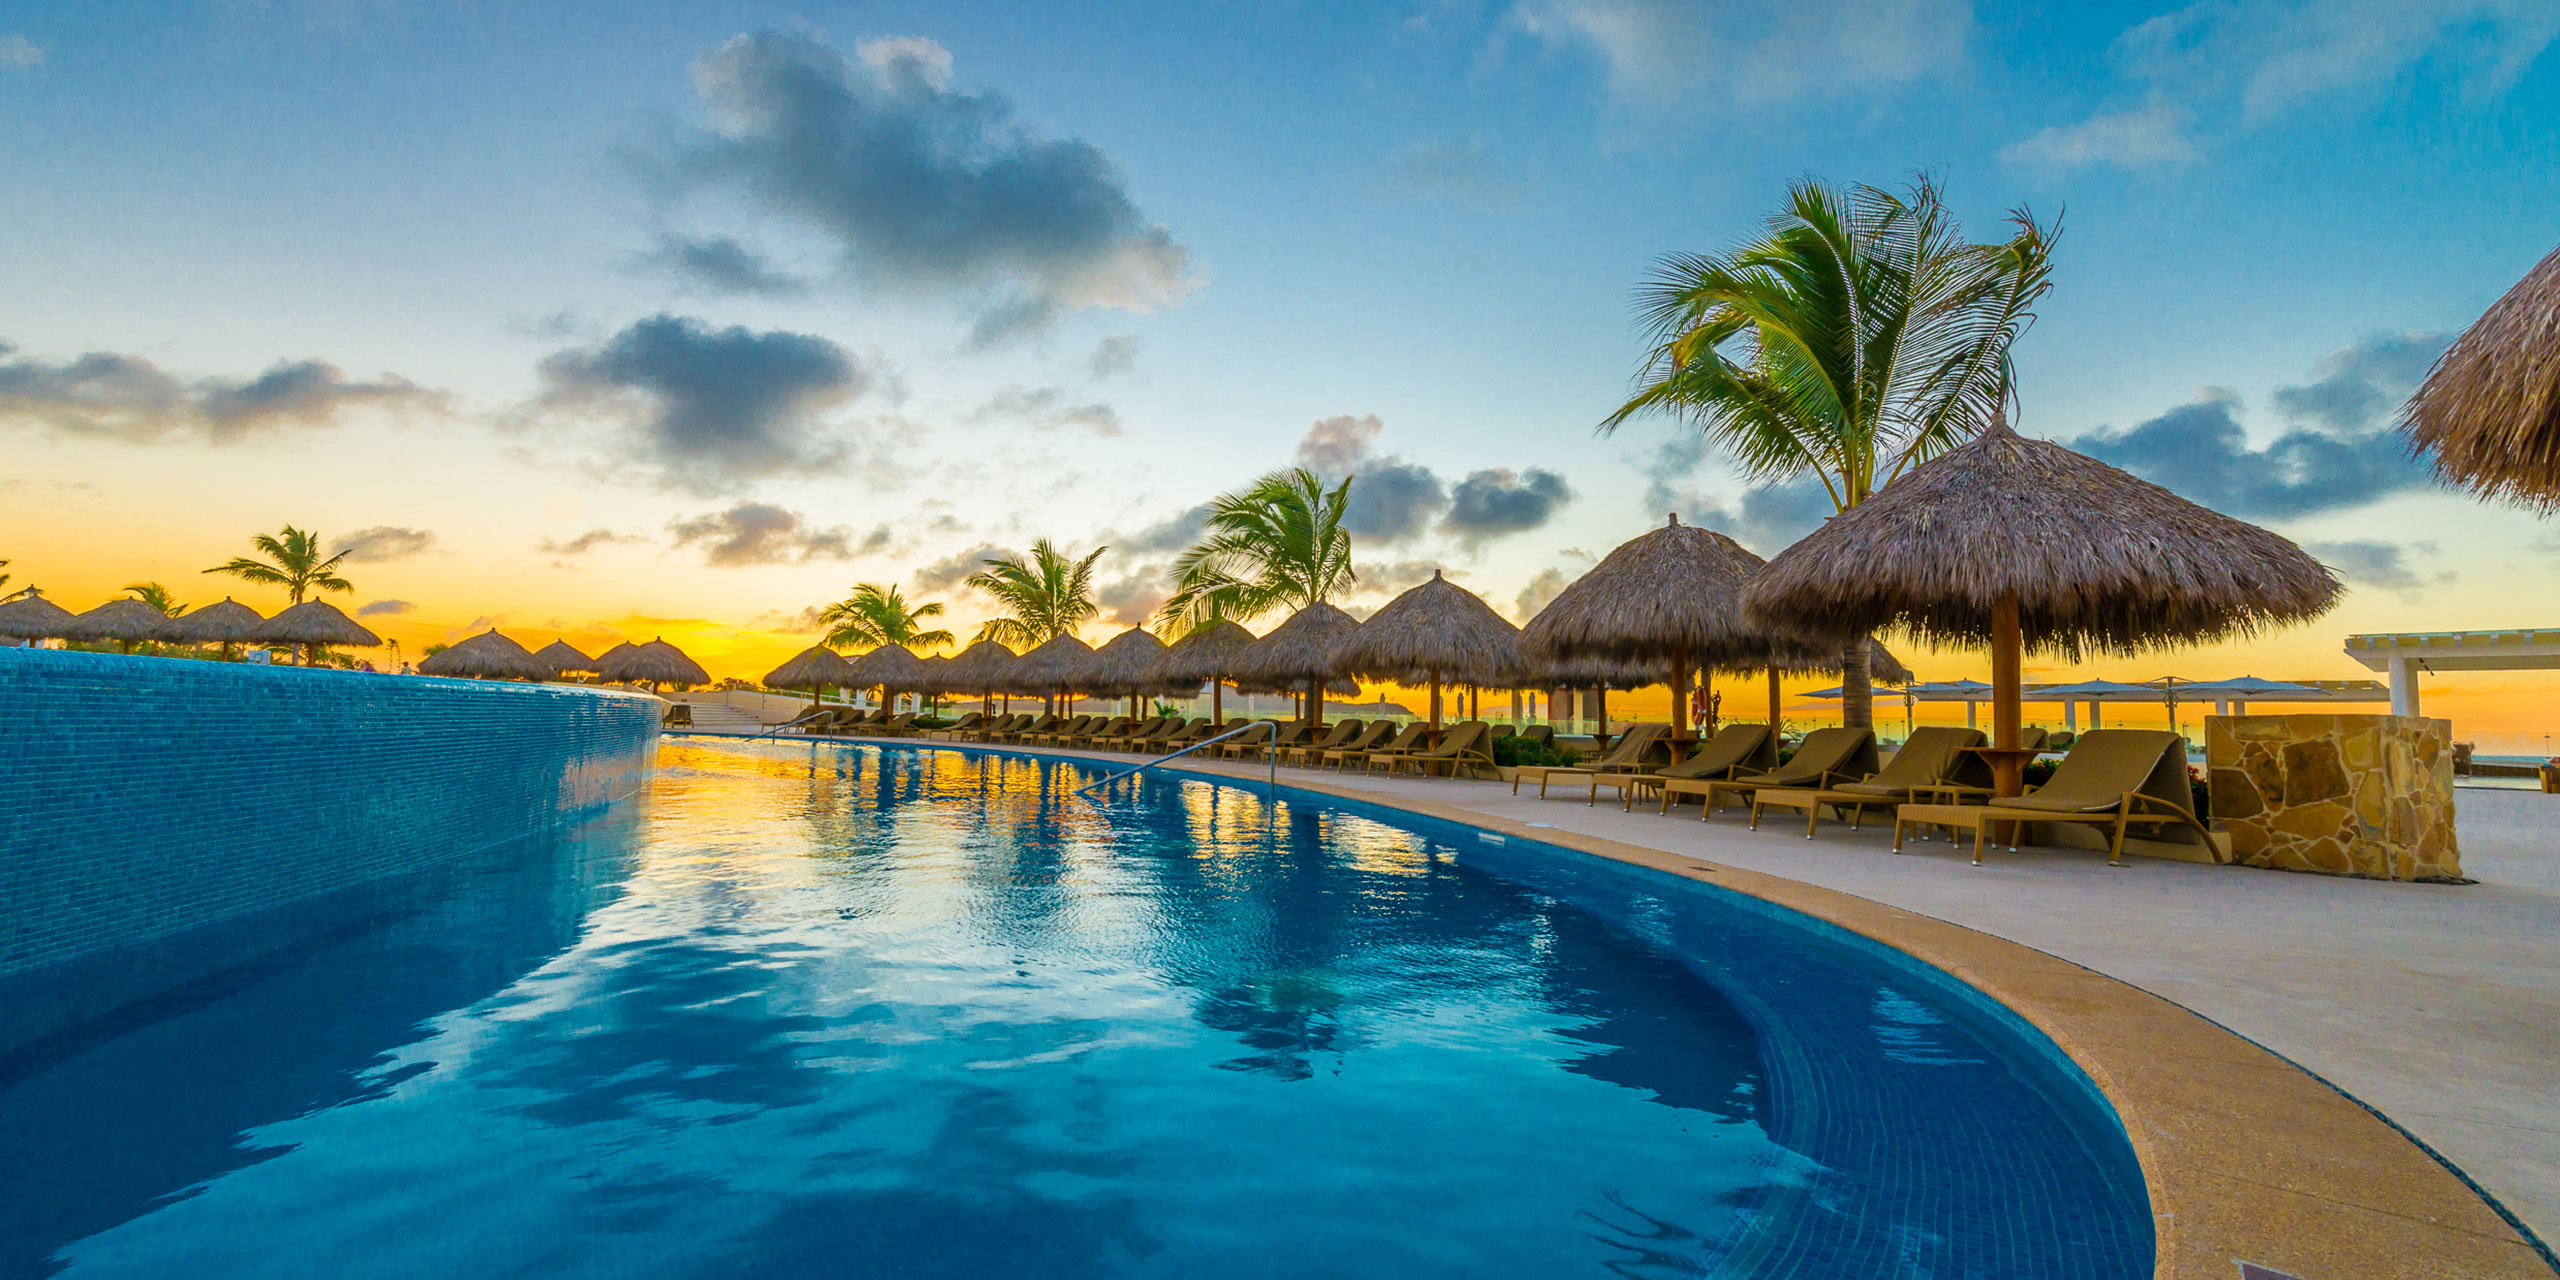 10 Best AllInclusive Family Resorts in Mexico for 2019 